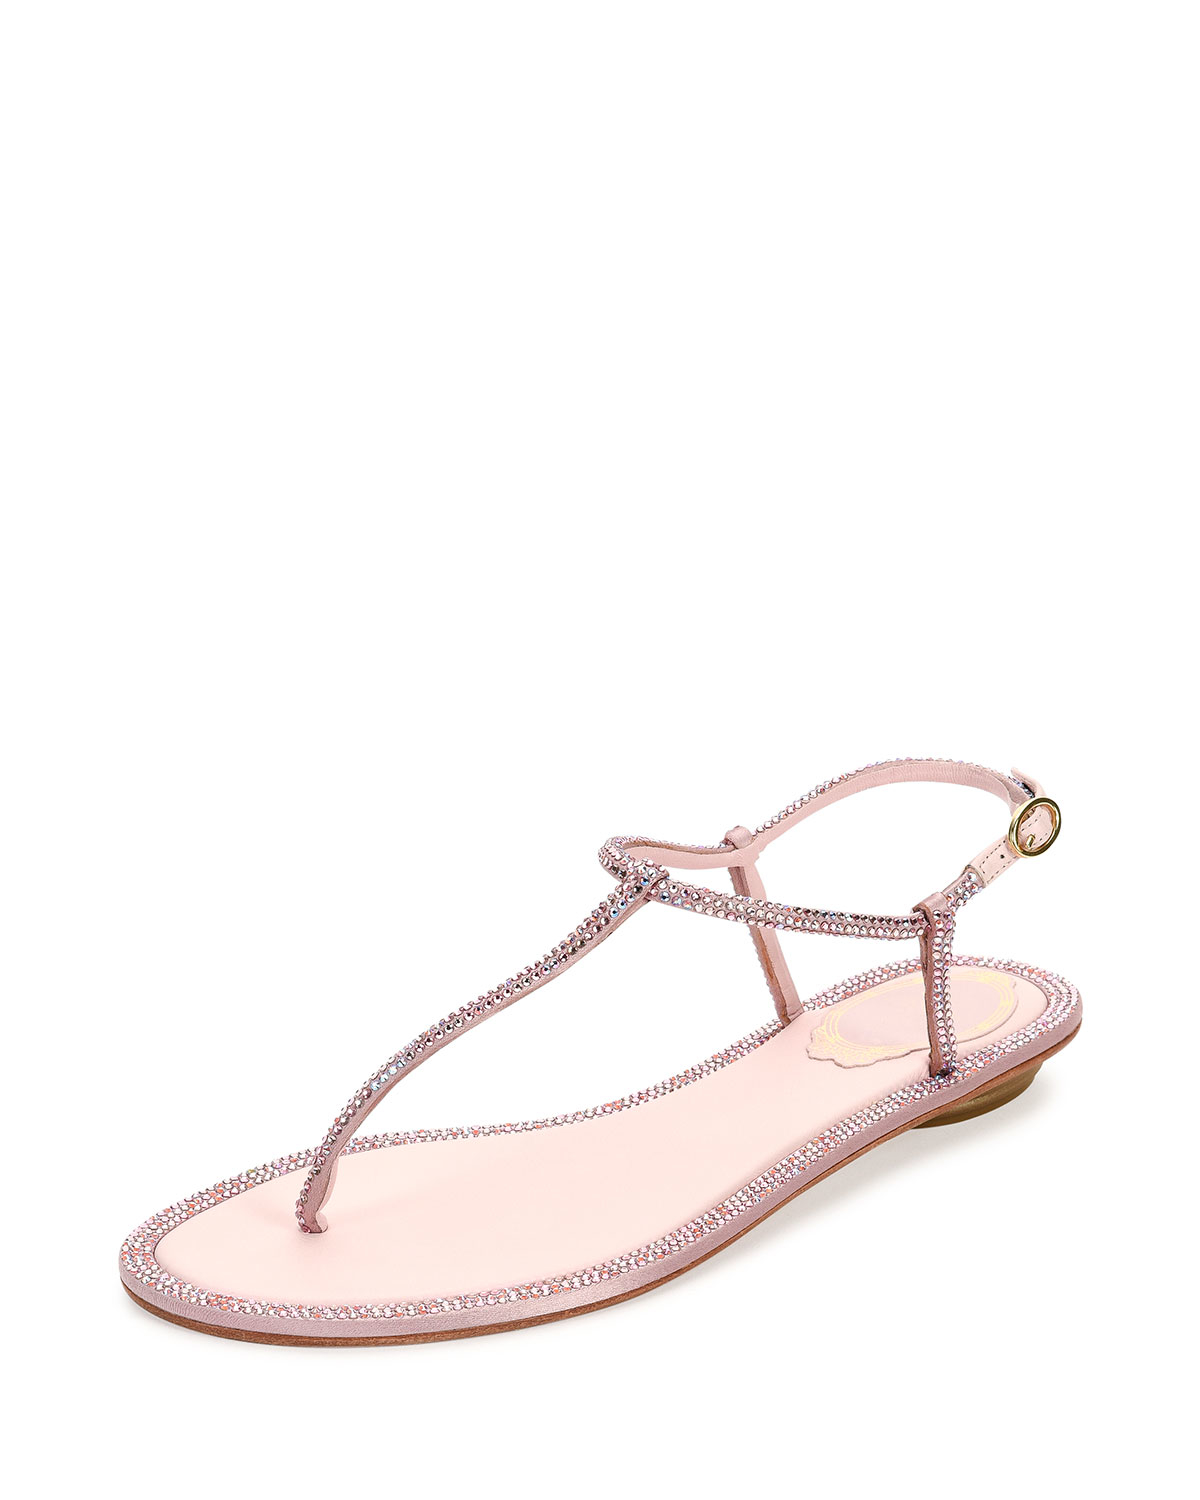 Rene Caovilla Crystal Flat Thong Sandal in Pink - Lyst